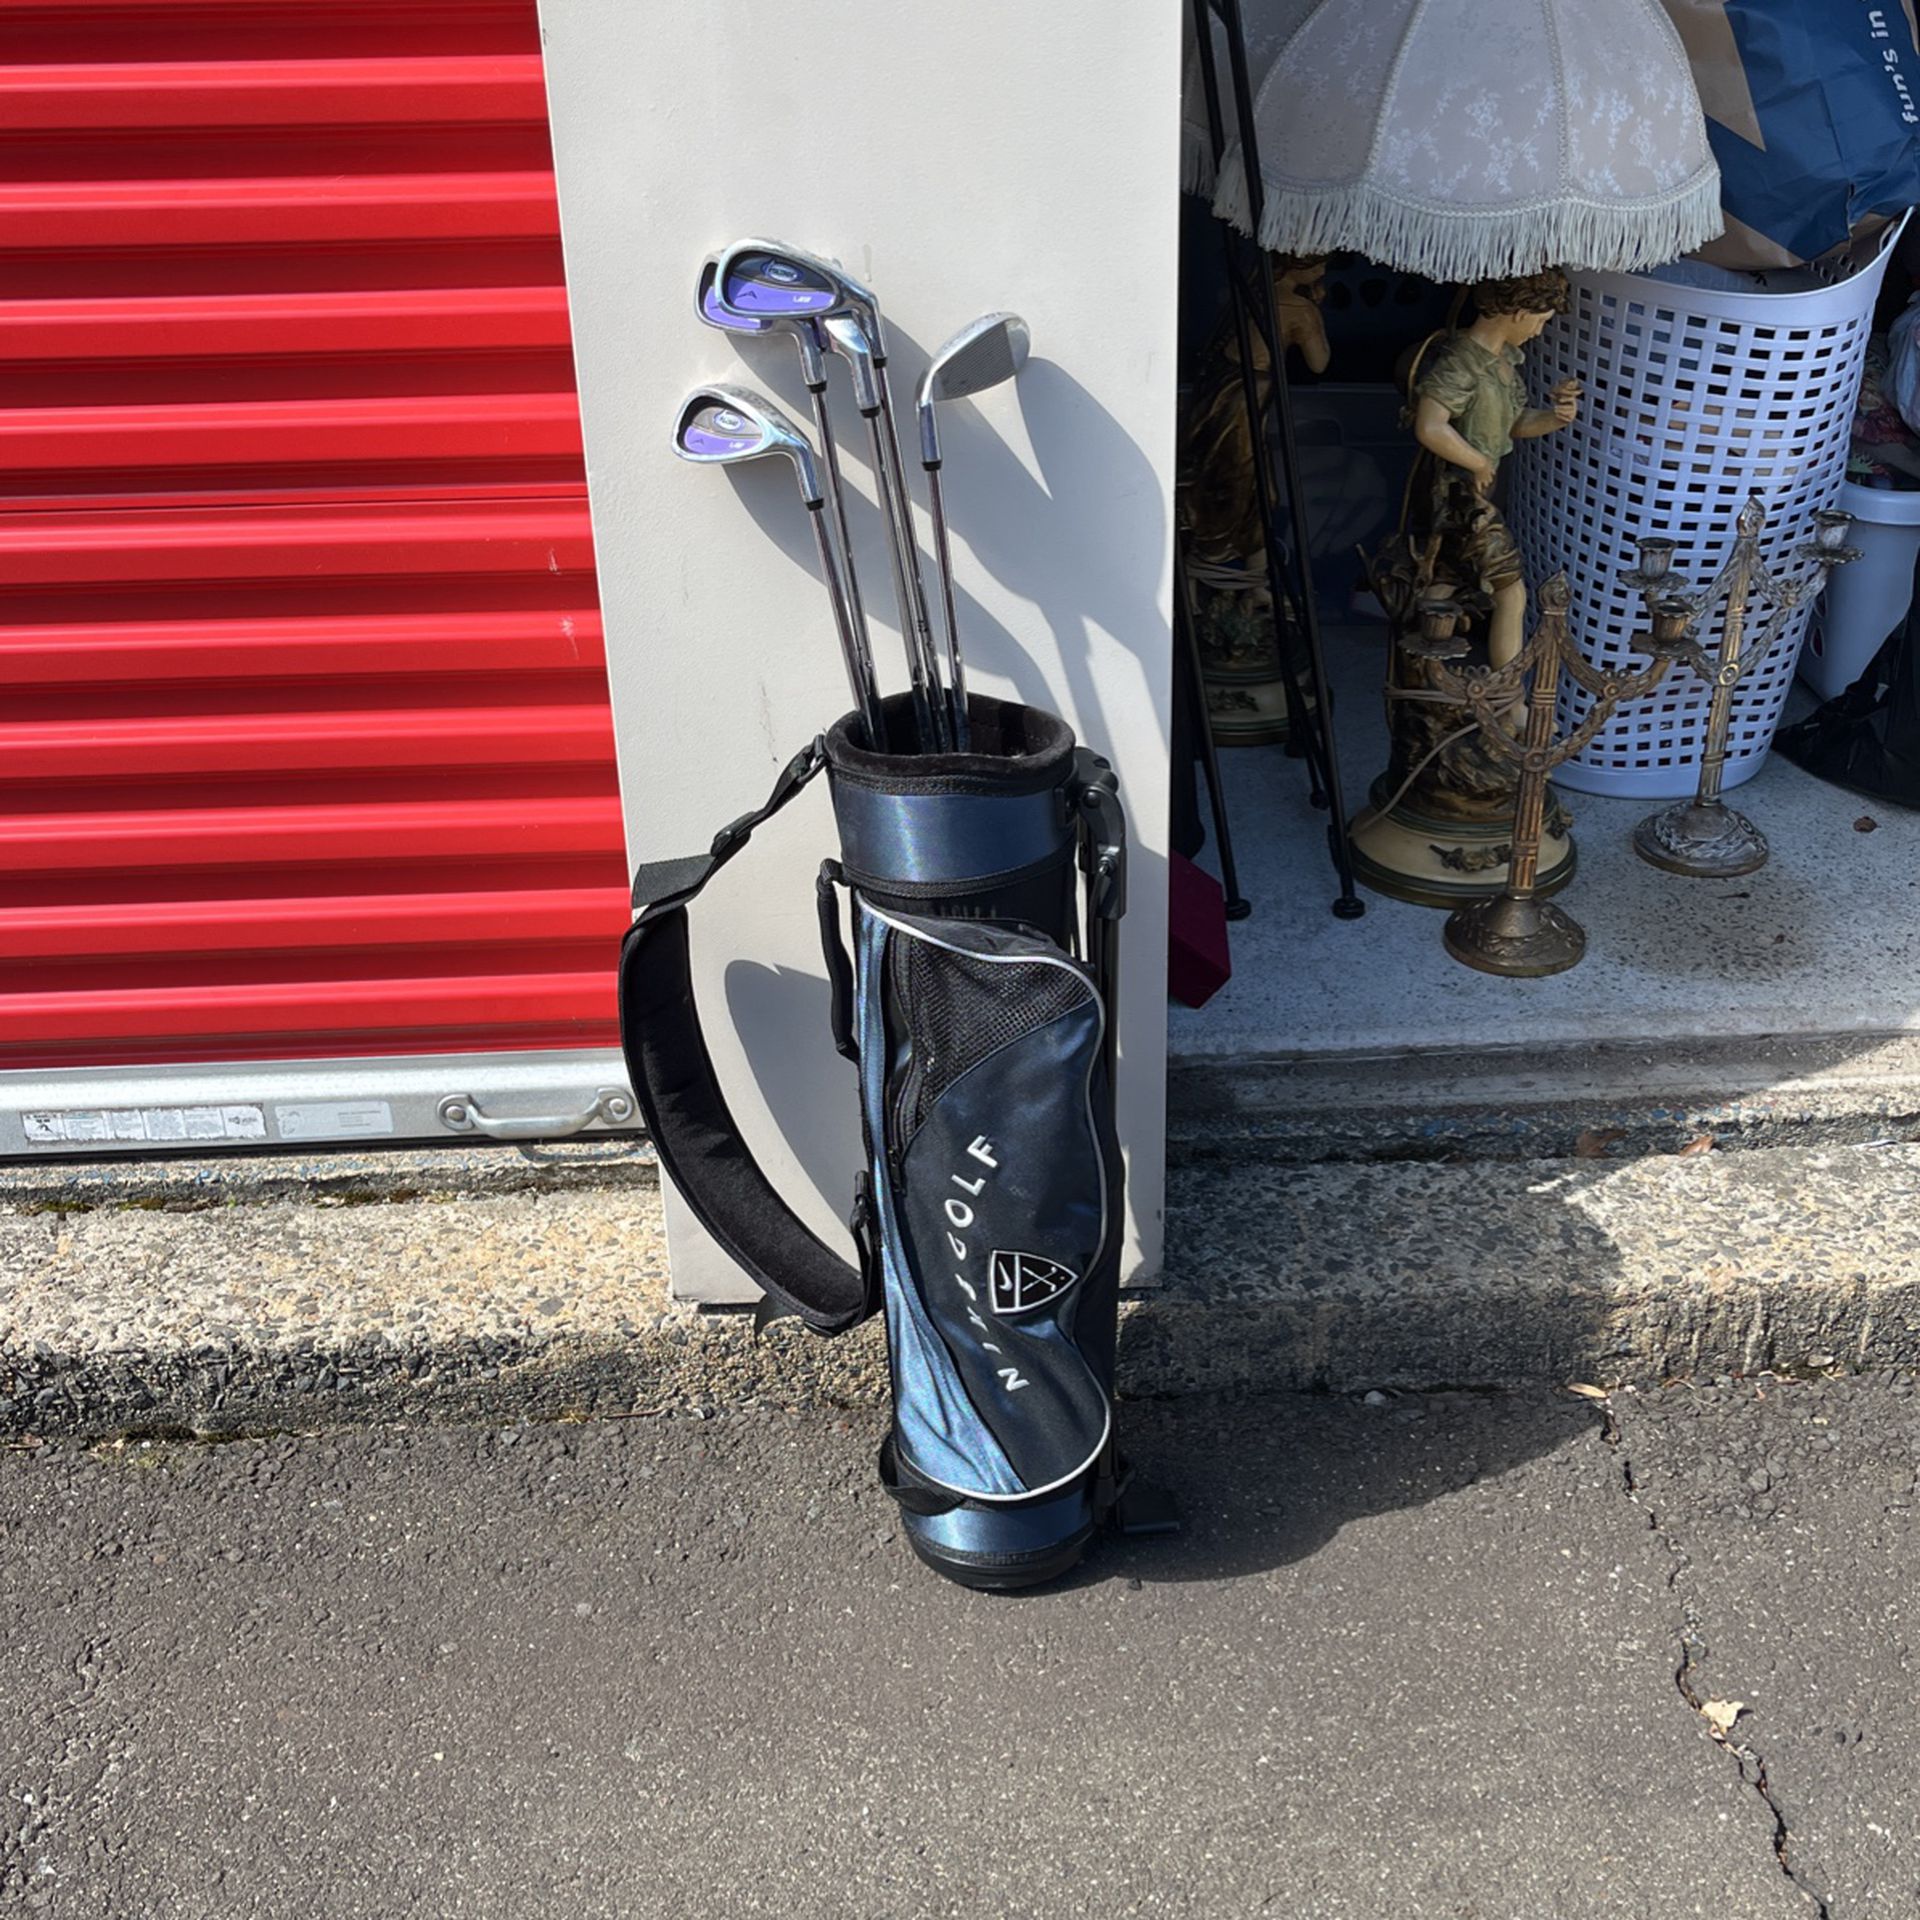 5 Voltage Lady Golf Clubs 